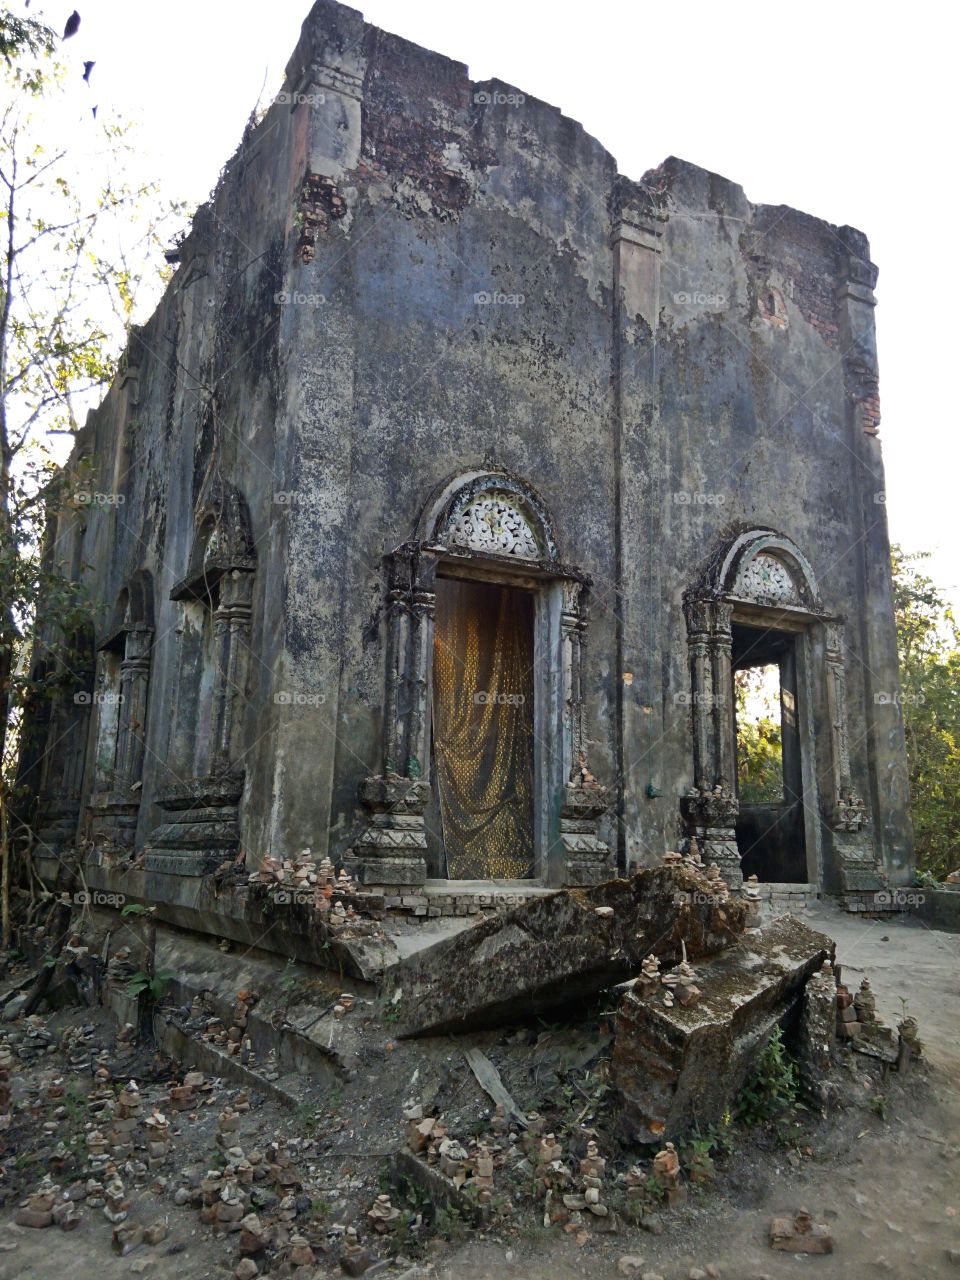 Temple. Abandoned, but never deserted visitors